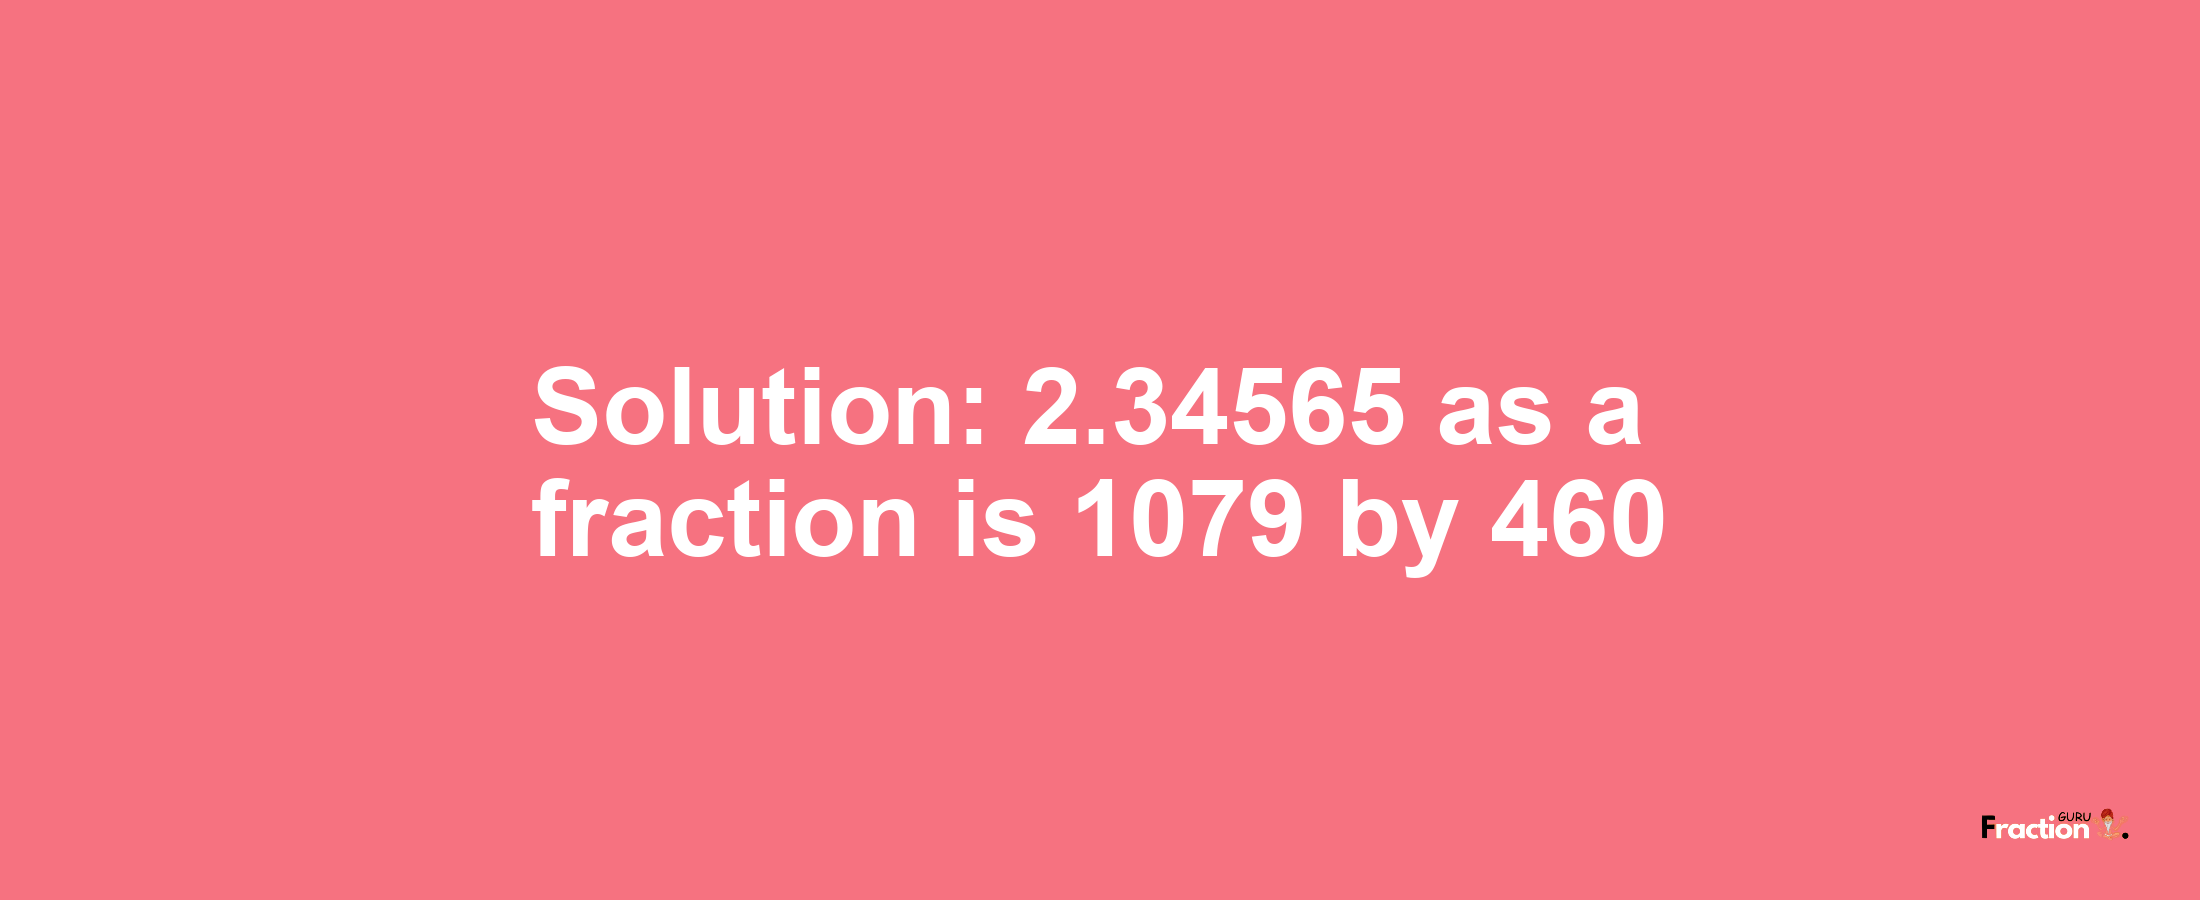 Solution:2.34565 as a fraction is 1079/460